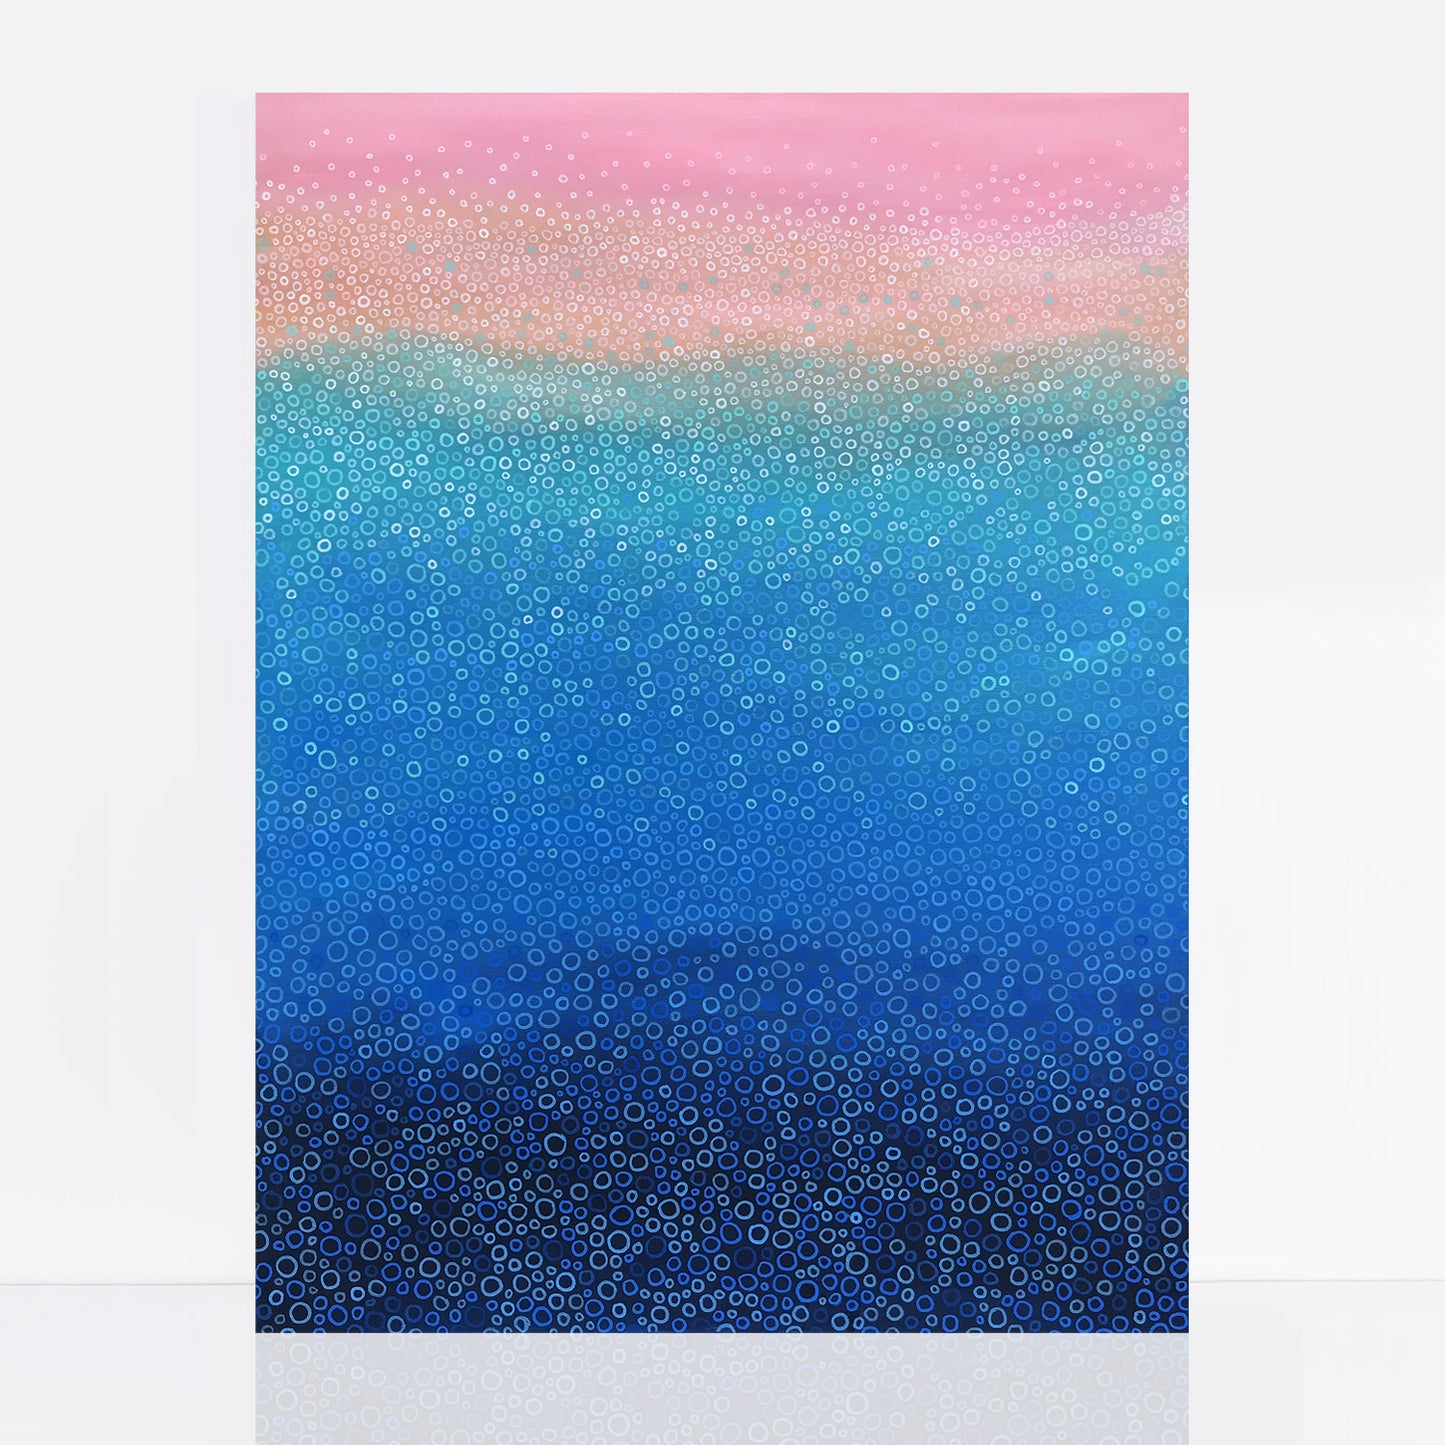 abstract painting in blues, soft pinks and turquoise with hundreds of painted circles 